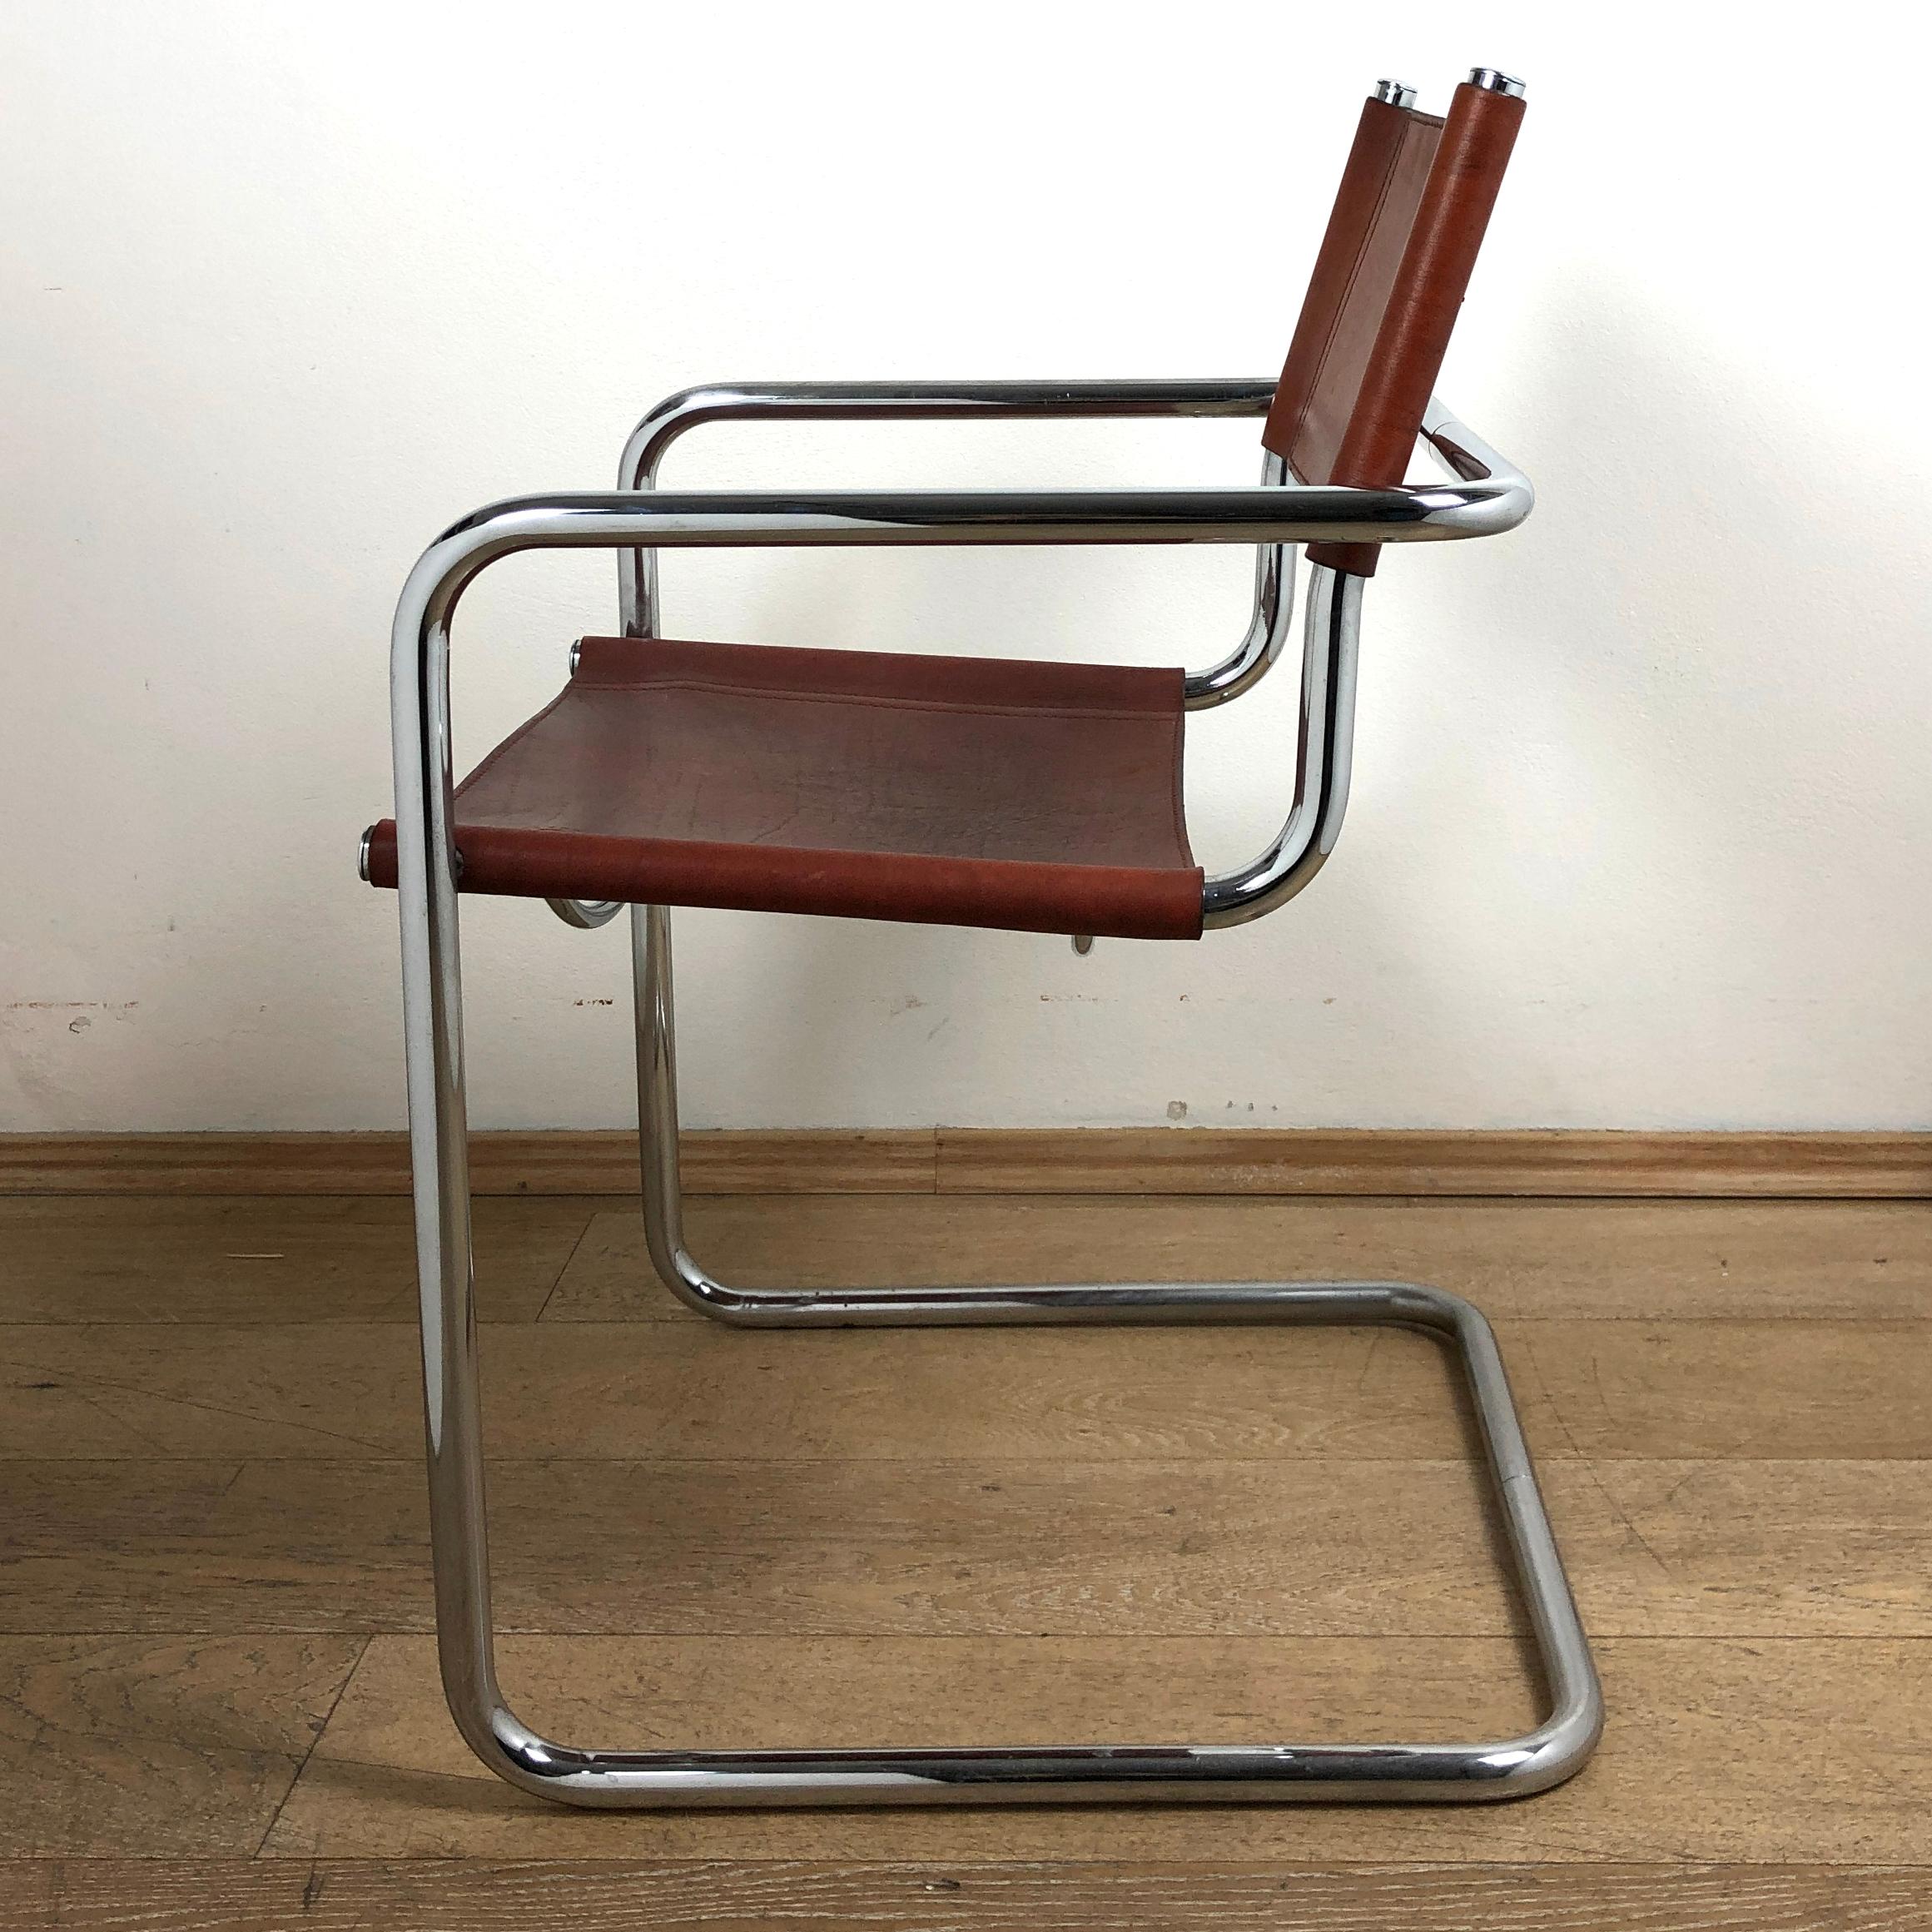 Frame chrome-plated tubular steel cantilever chair made according the famous iconic chair S33 designed in 1926 by Mart Stam.
This chairs have deep intense leather seats, backrests and armrests with wonderful original patina. The leather is in